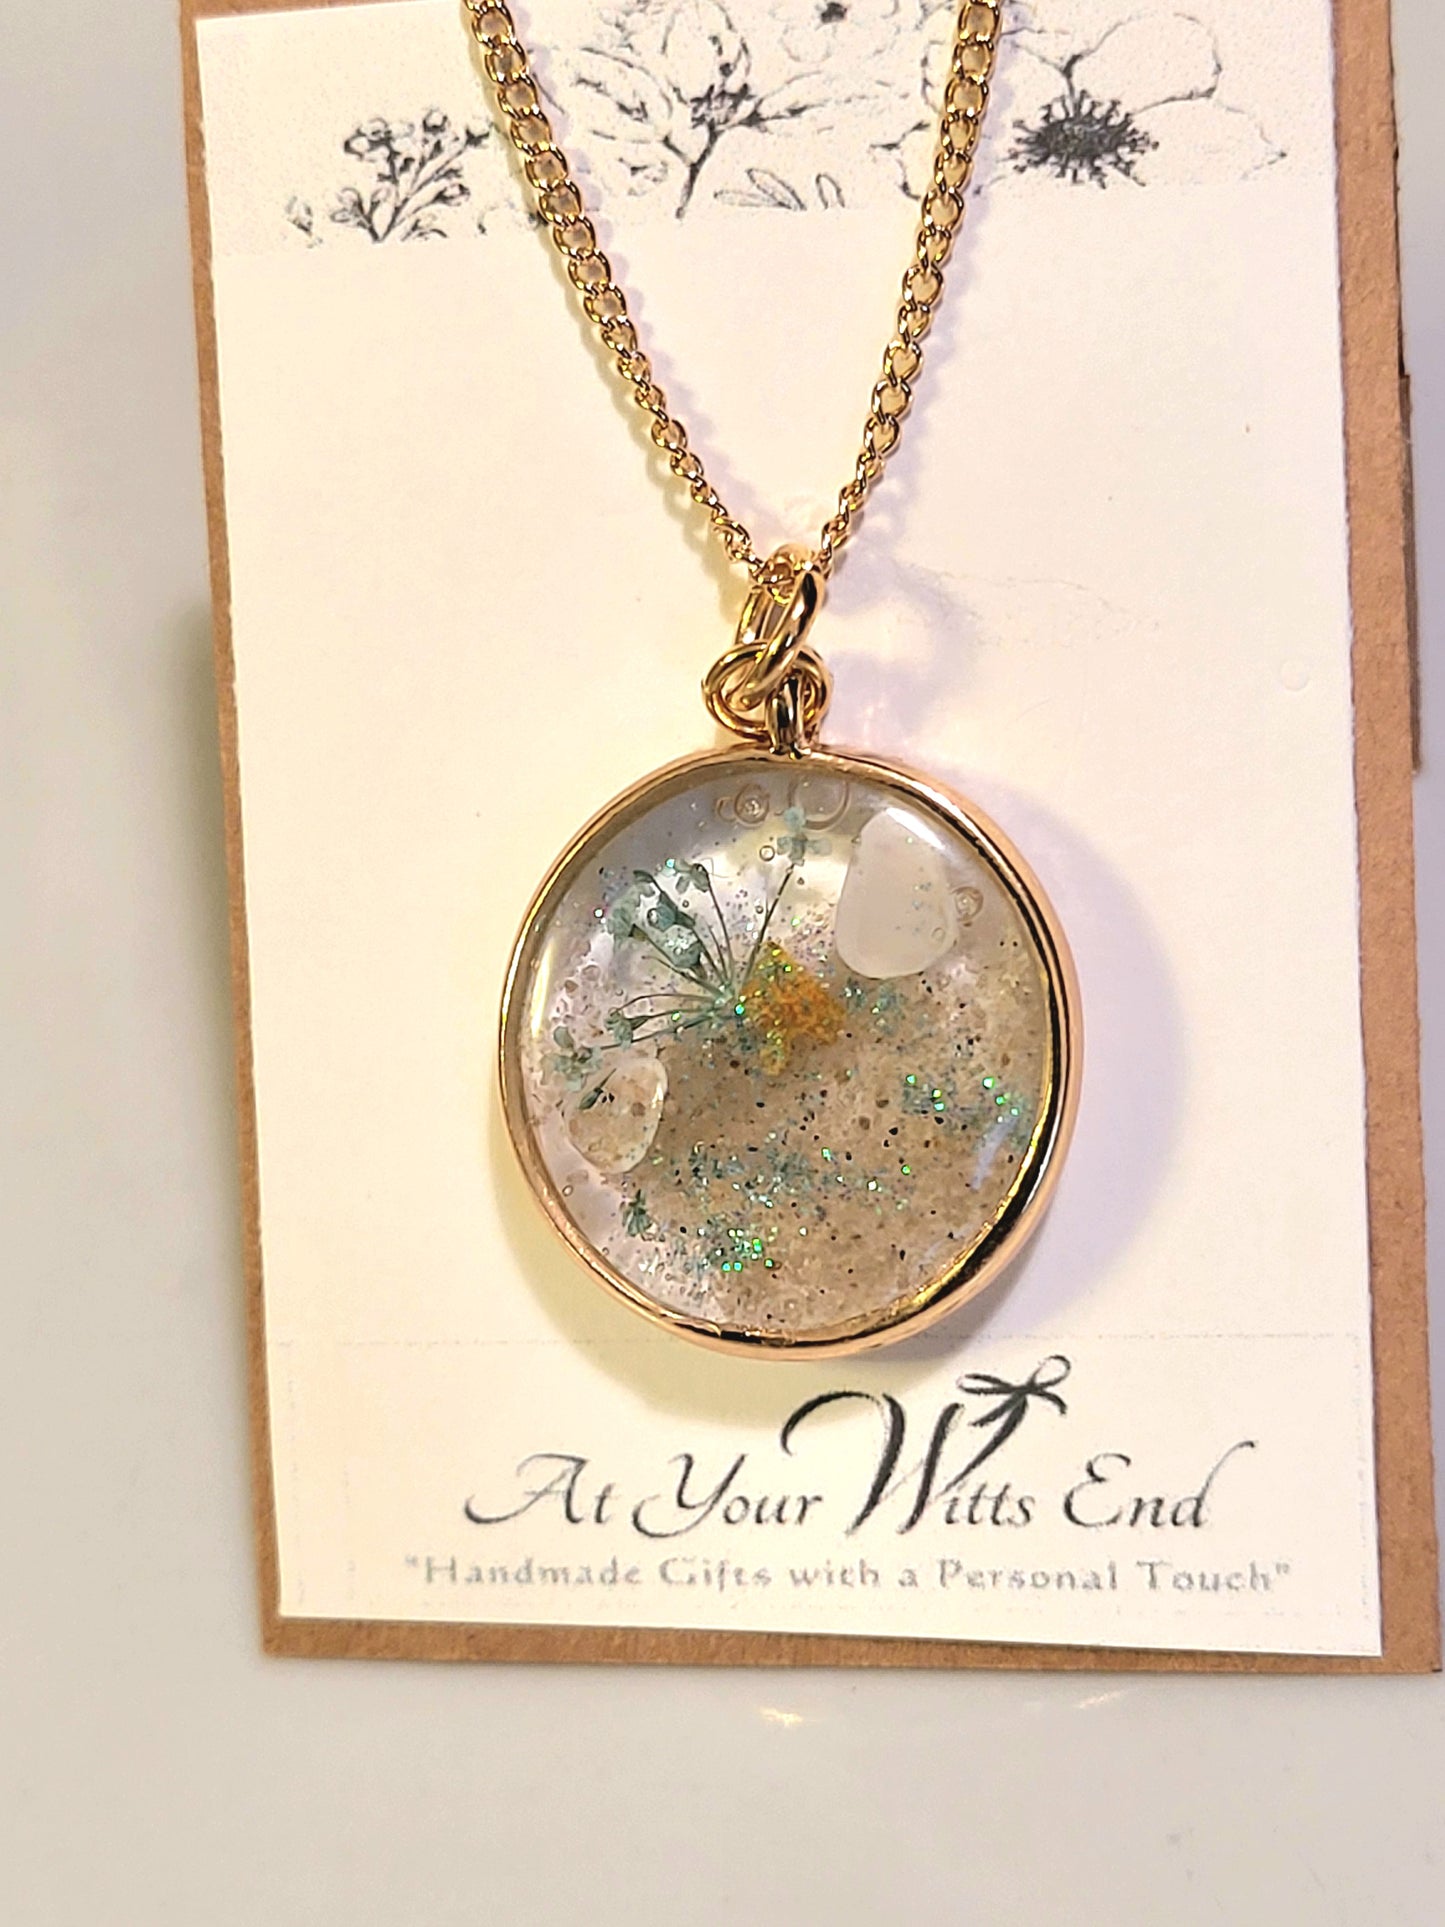 Pressed Queen Ann's Lace & Shell Necklace, resin, beach jewelry